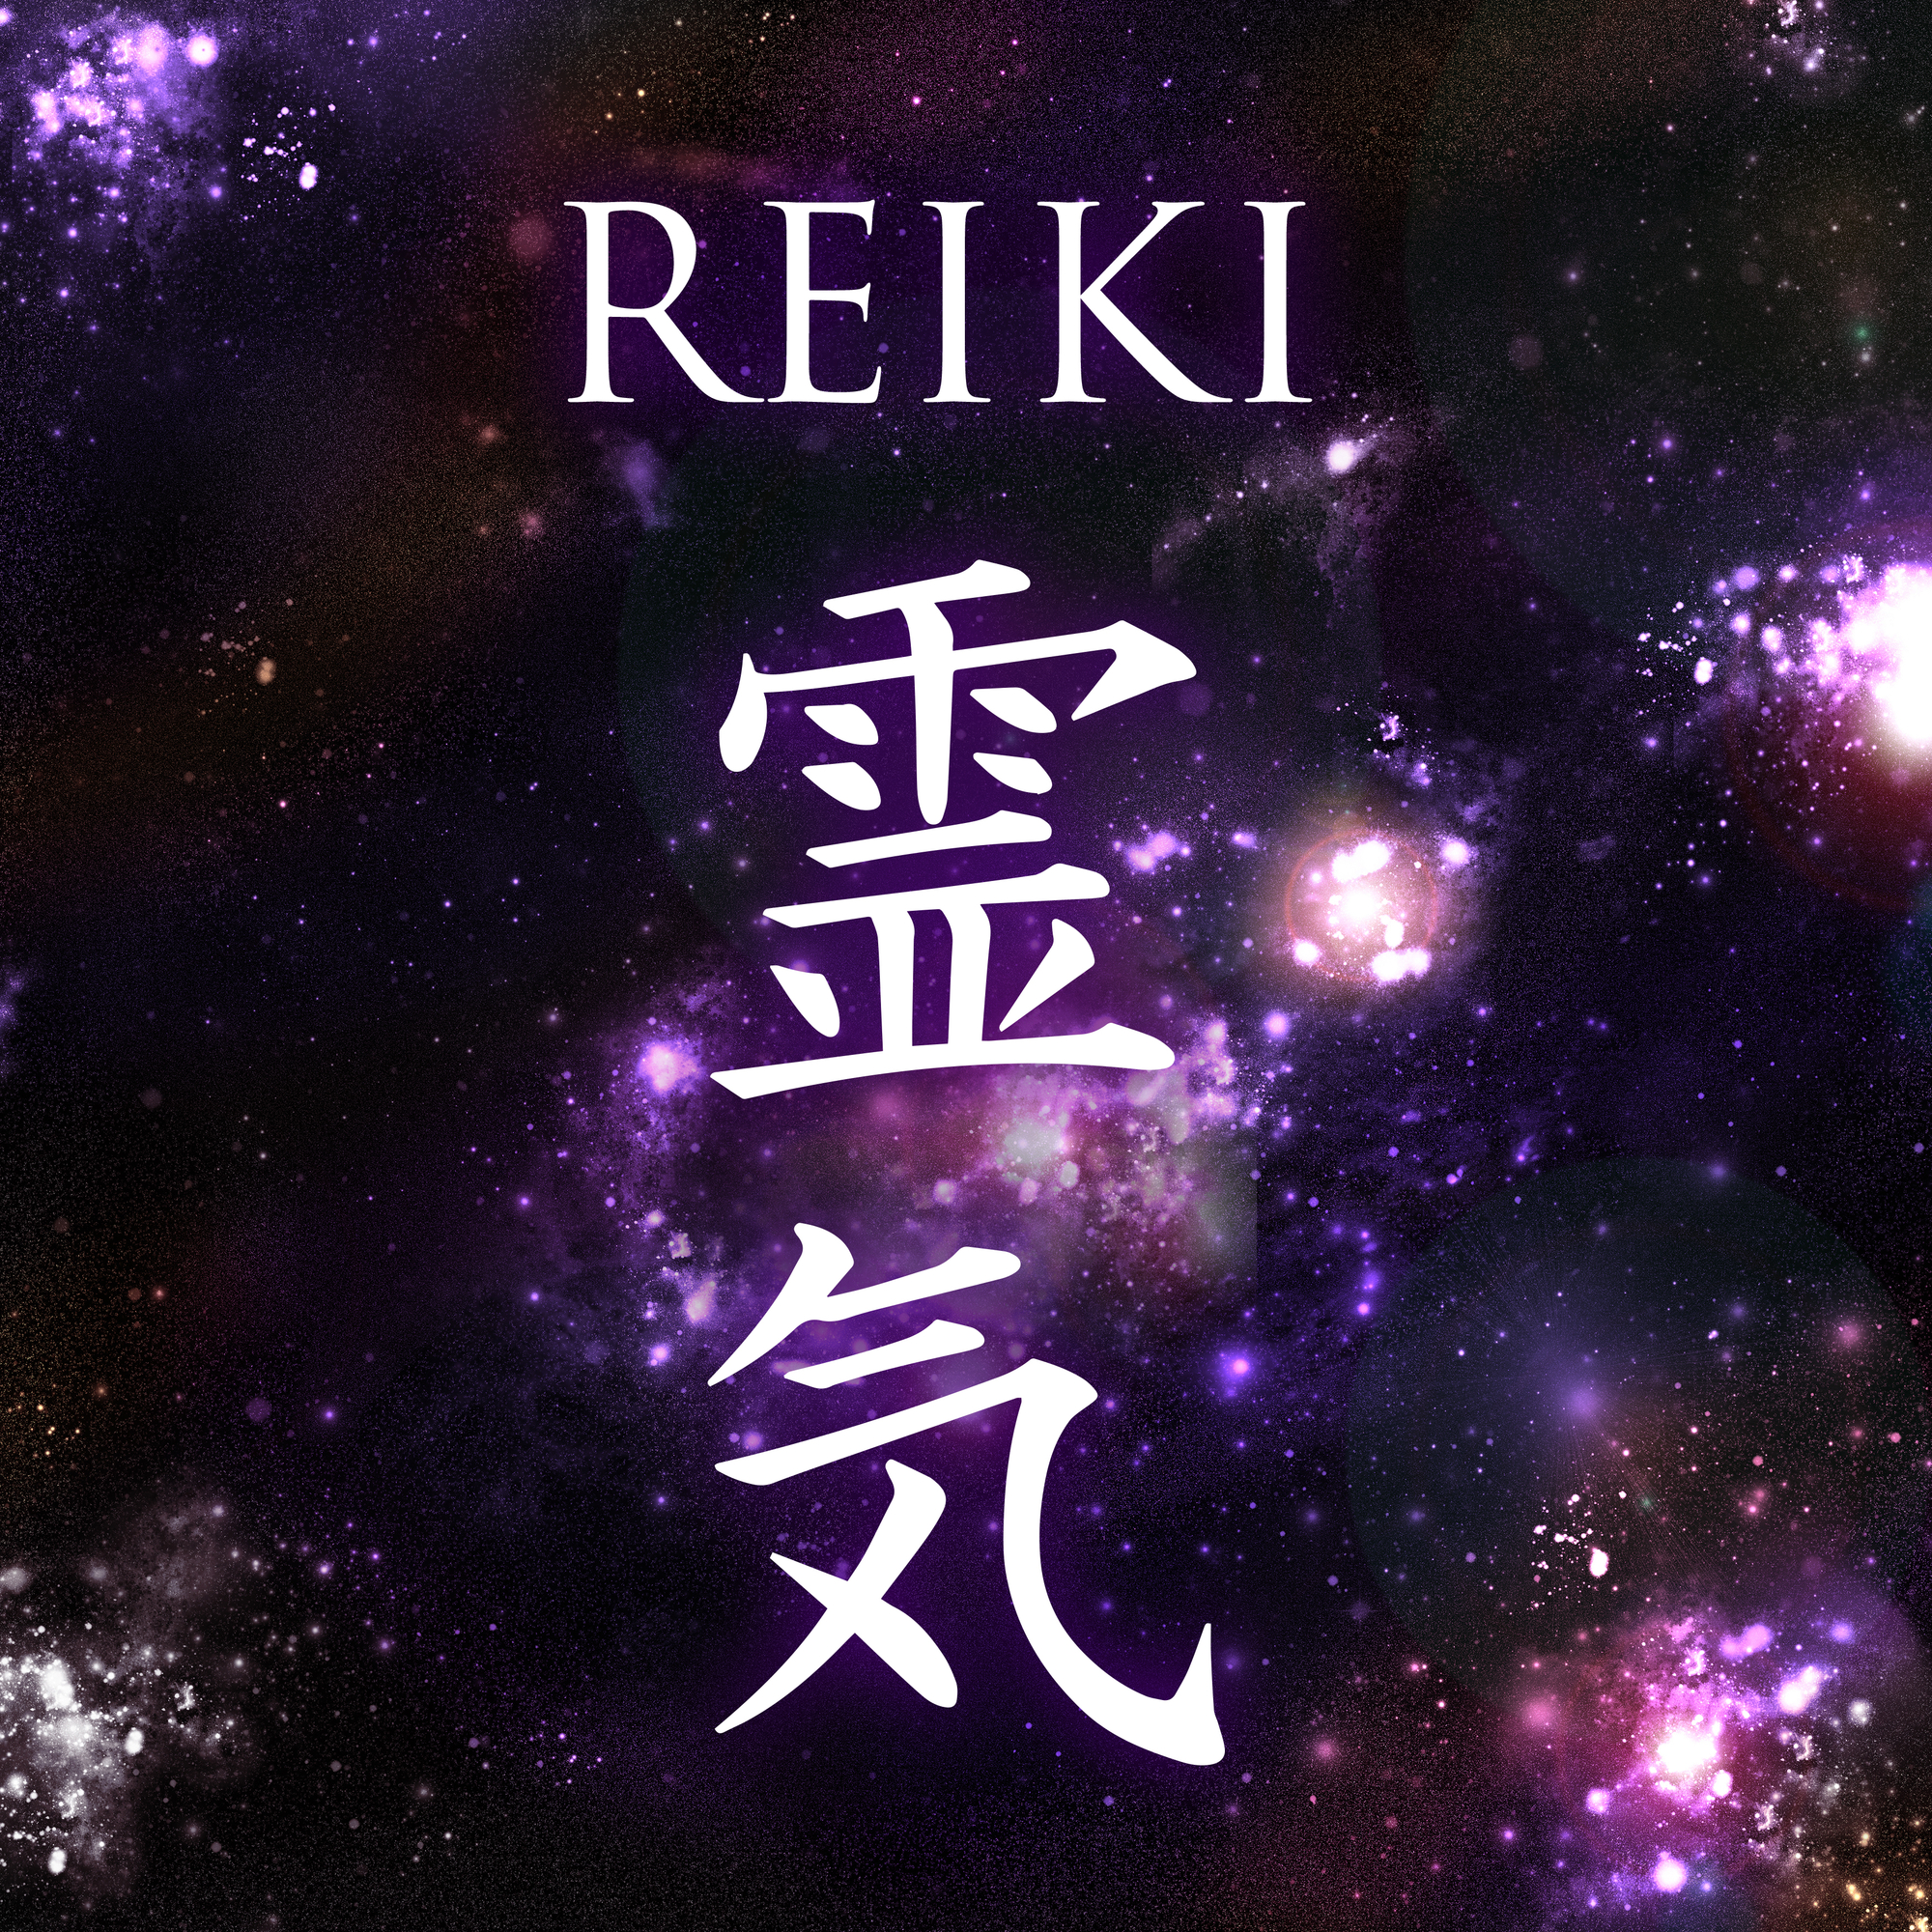 Why We Must Talk About Reiki Healing